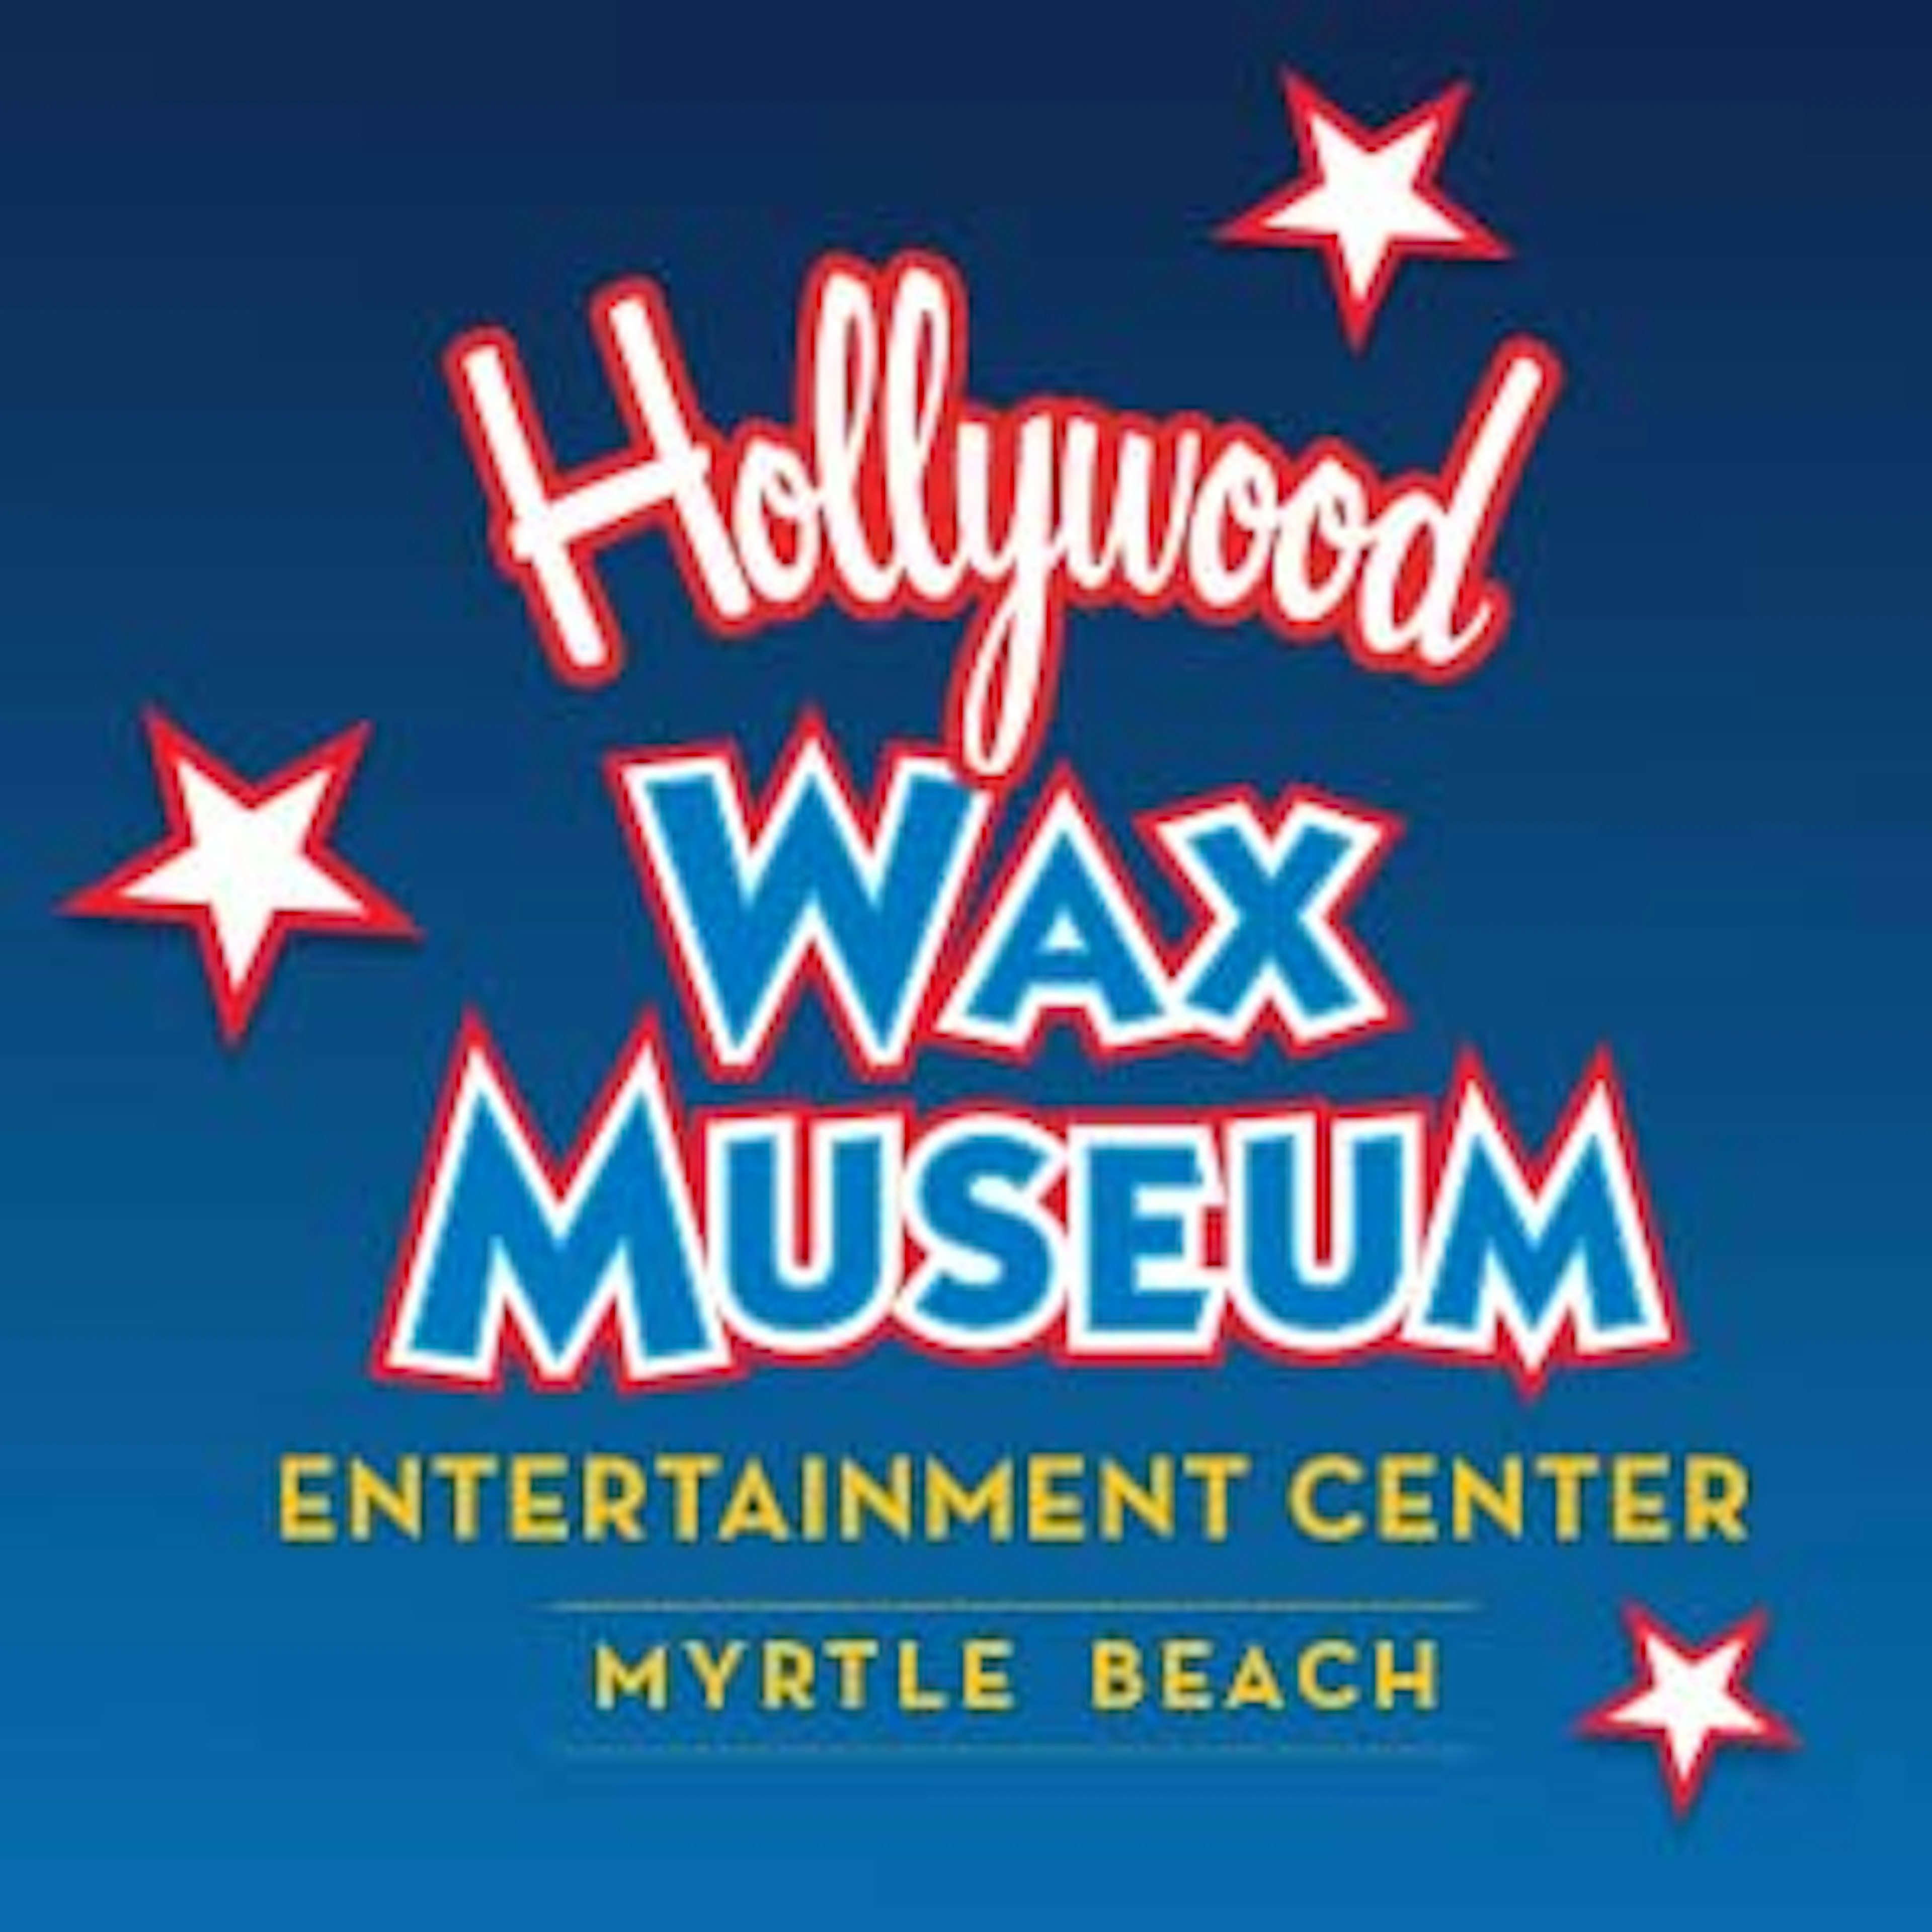 Hollywood Wax Museum Entertainment Center- Hannah’s Maze of Mirrors and Outbreak-Dread the Undead